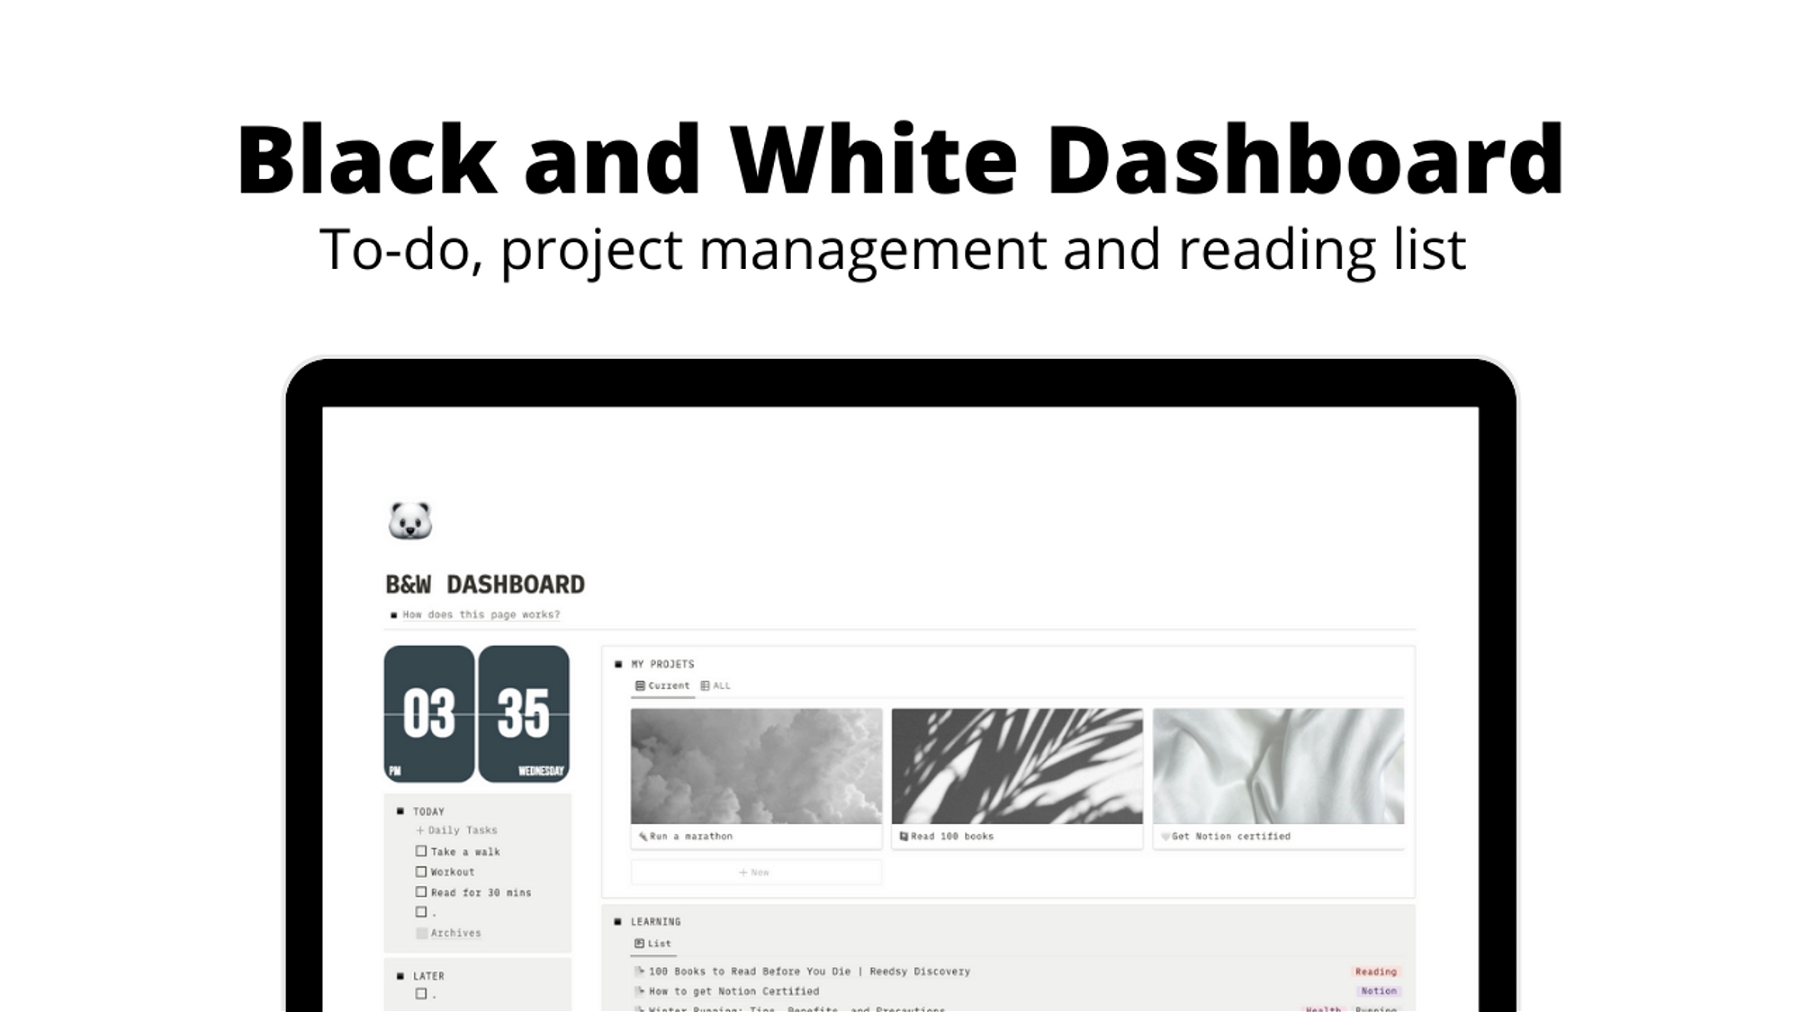 B&W DASHBOARD 🐻‍❄️ - Keep track of your projects and to-dos in a minimalist dashboard